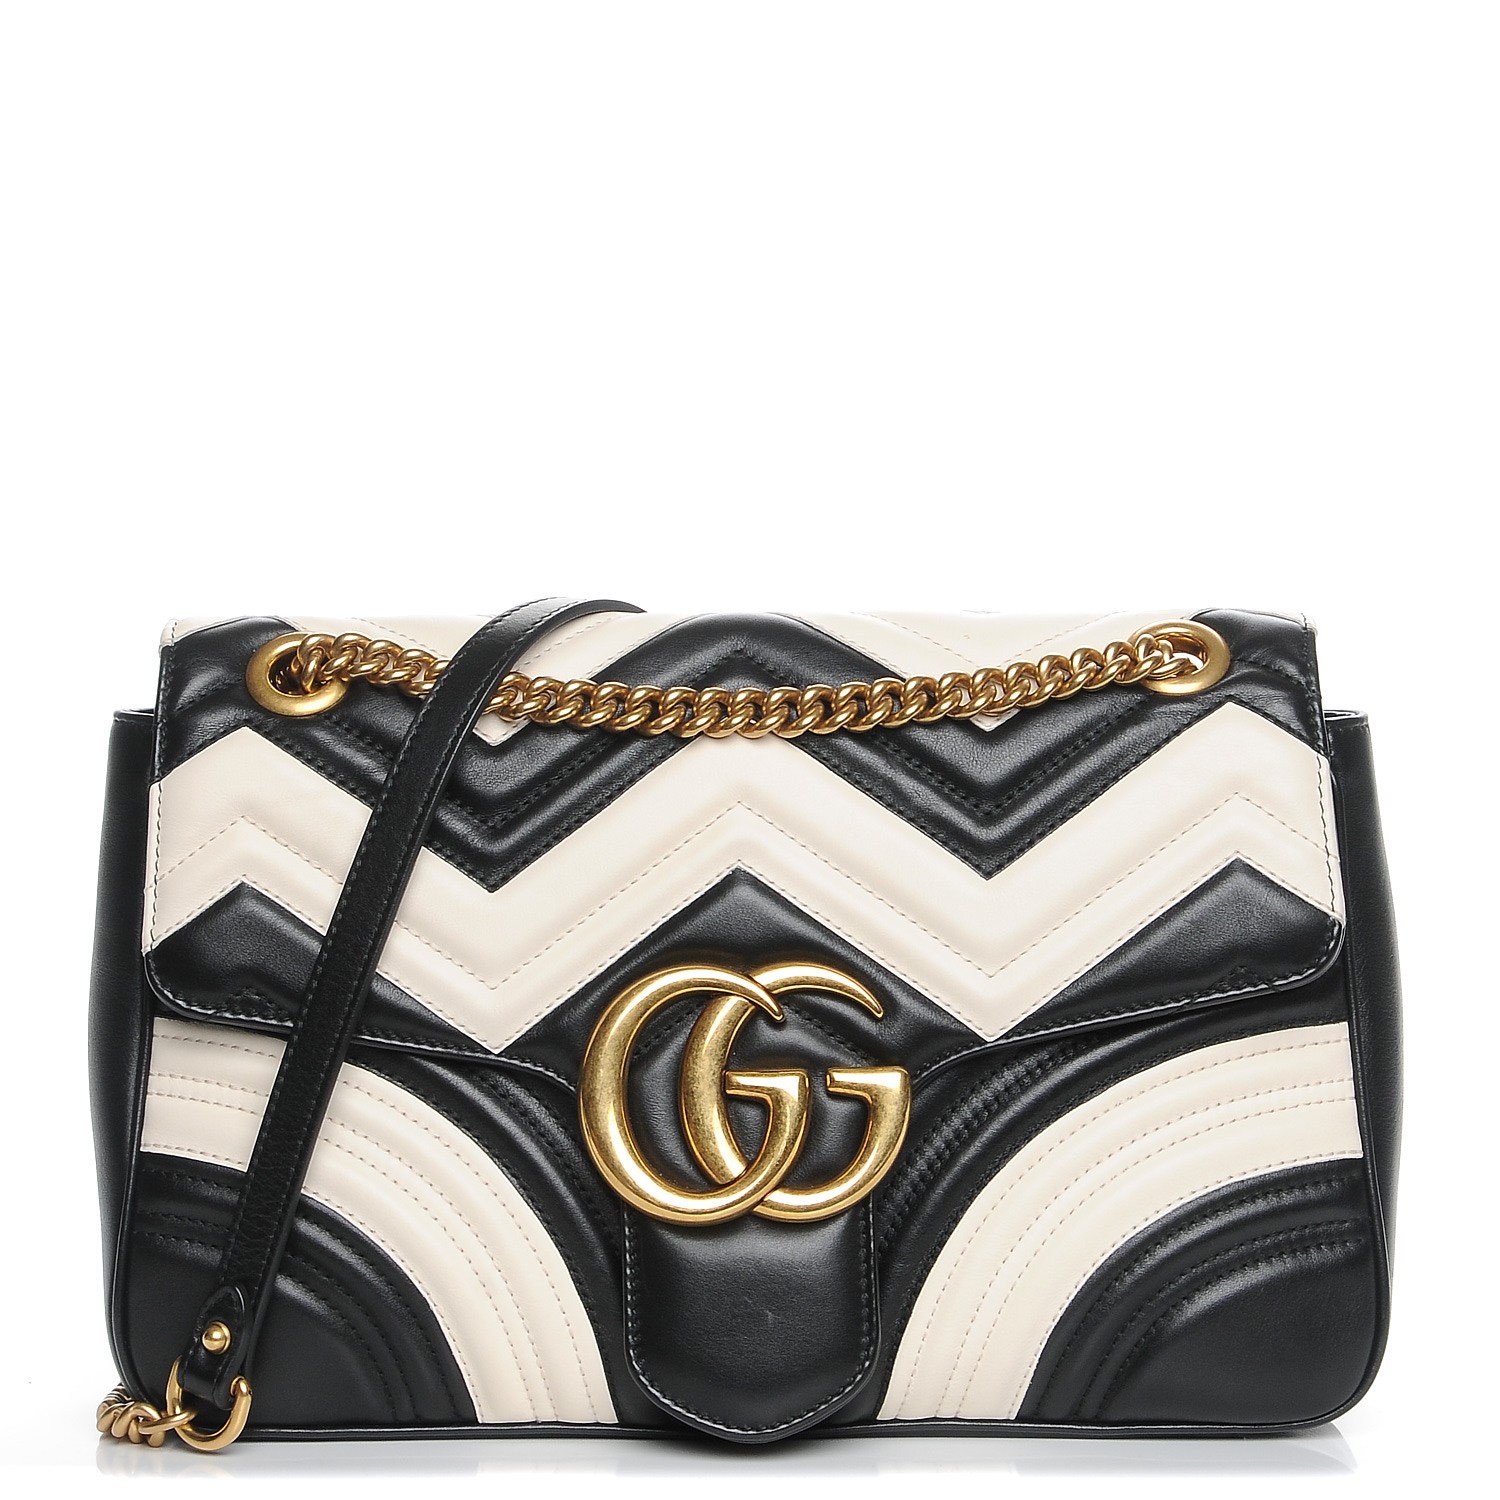 gucci black and white marmont bag